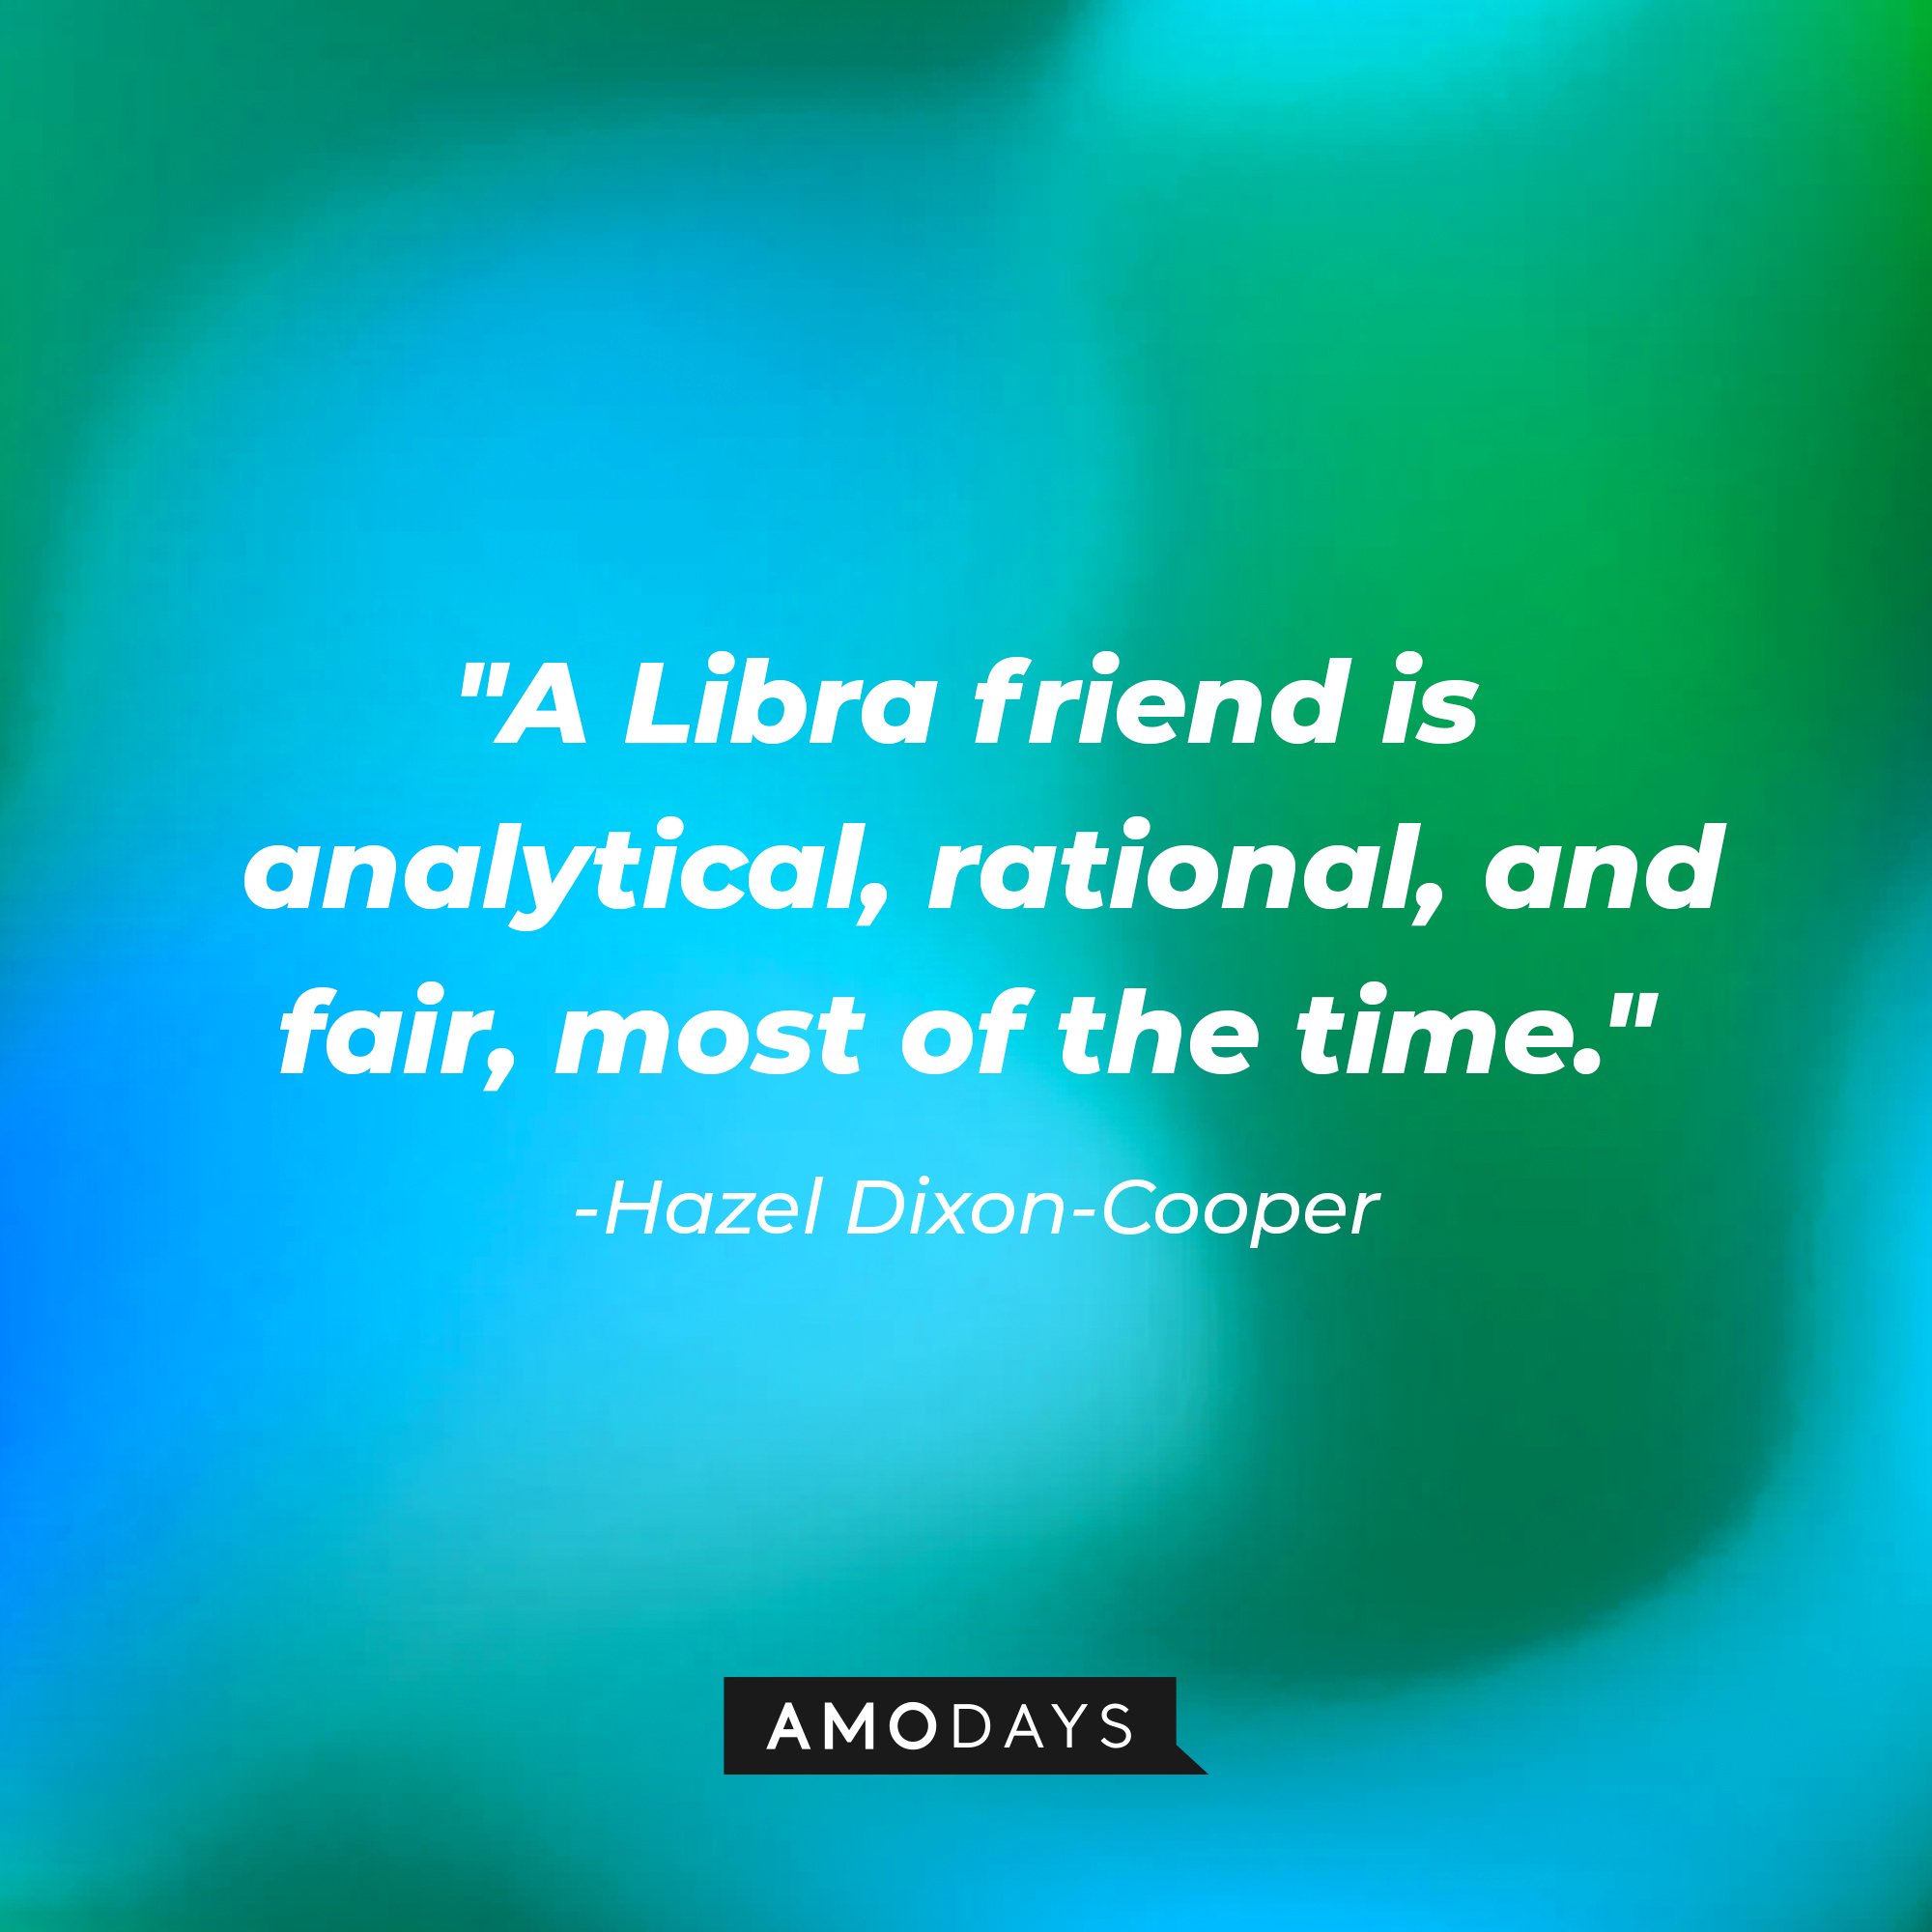 Hazel Dixon-Cooper's quote: "A Libra friend is analytical, rational, and fair, most of the time." | Image: AmoDays 